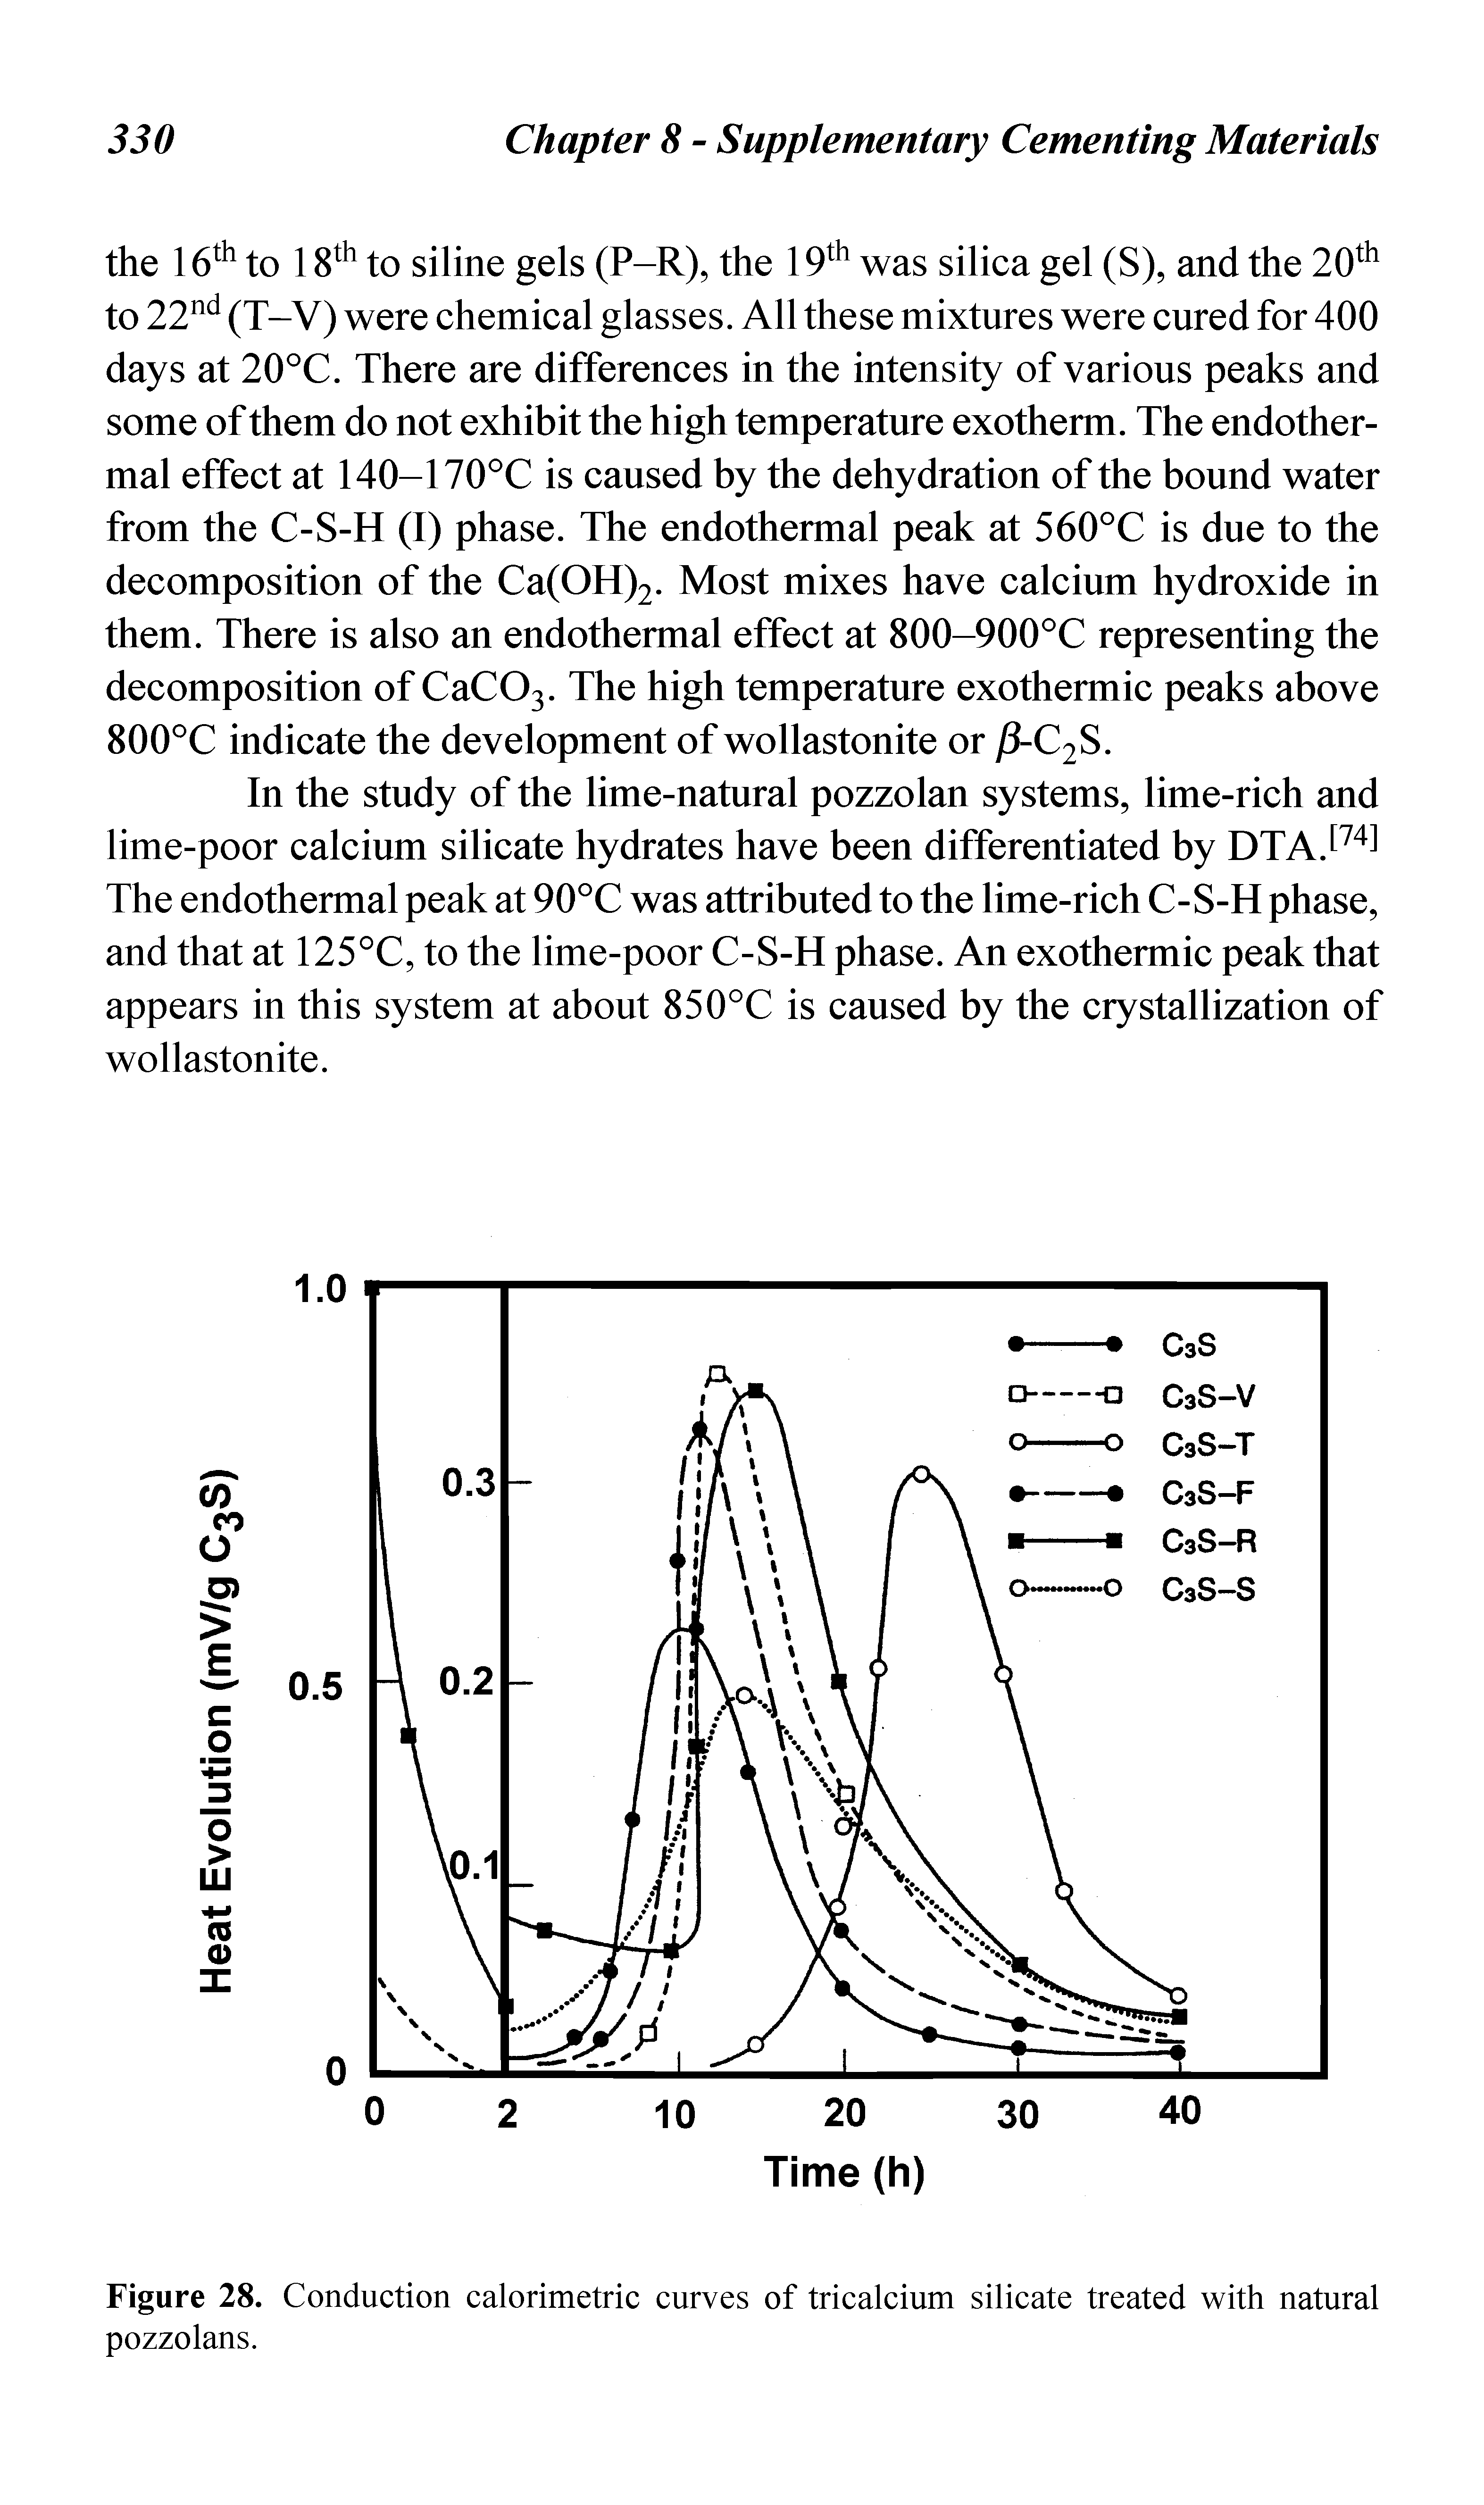 Figure 28. Conduction calorimetric curves of tricalcium silicate treated with natural pozzolans.